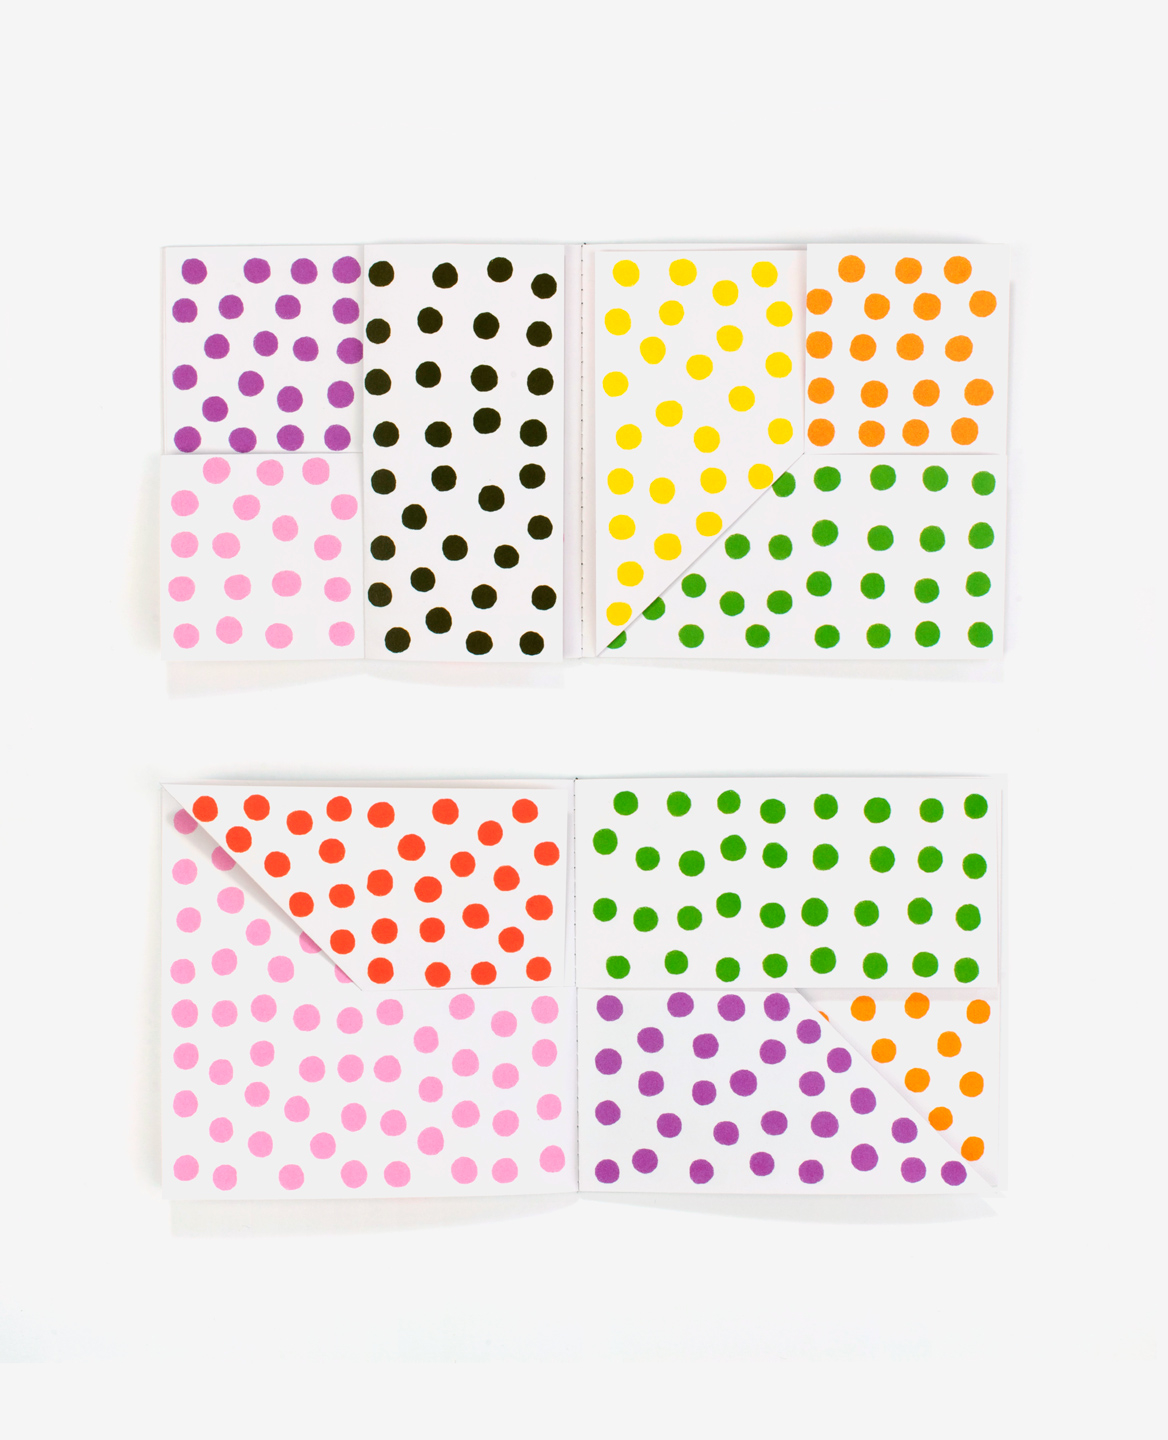 Multi colored pages of the book Dots by Antonio Ladrillo published by Éditions du livre